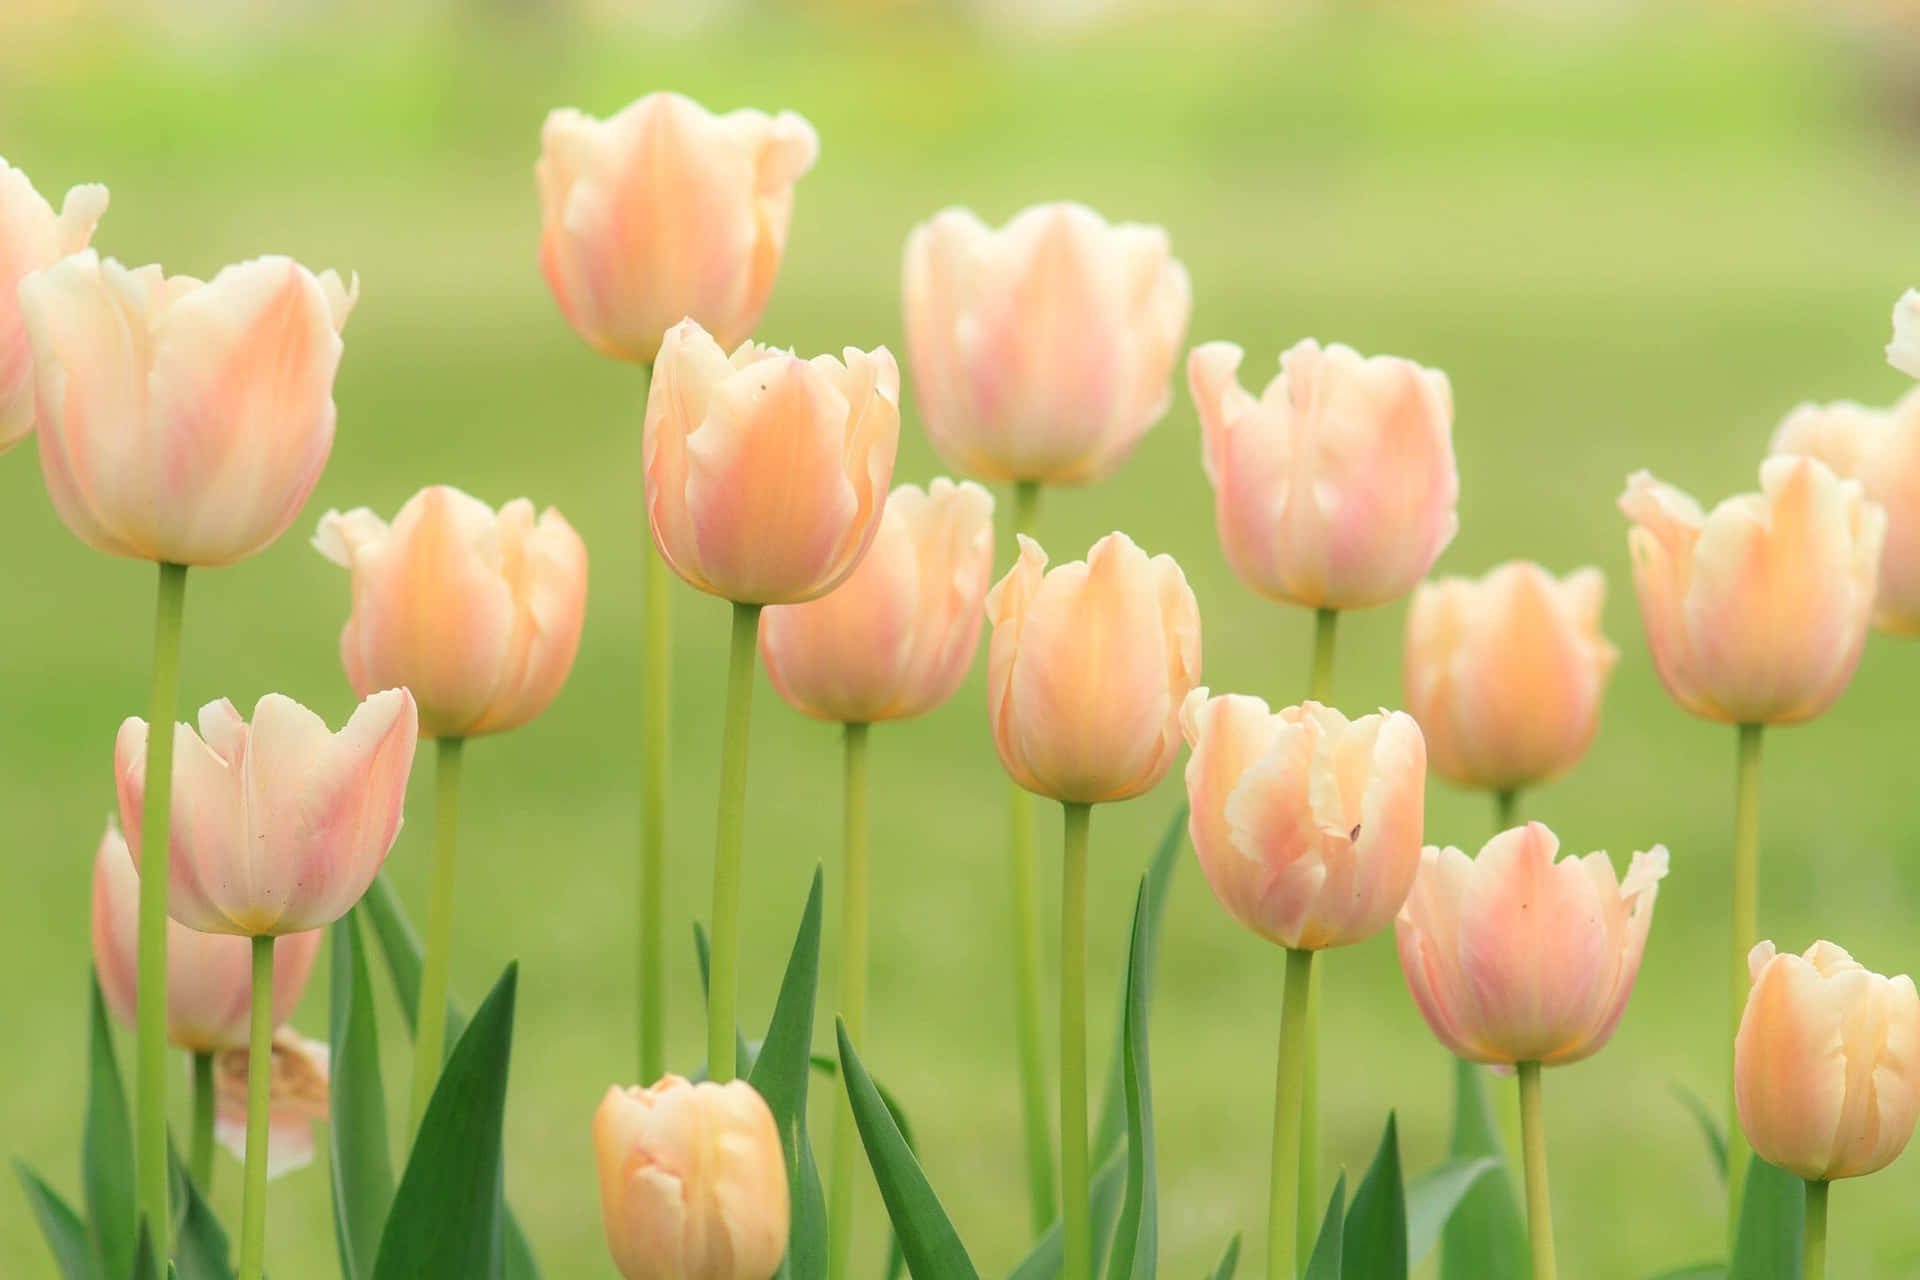 Bright Bouquets of Tulips